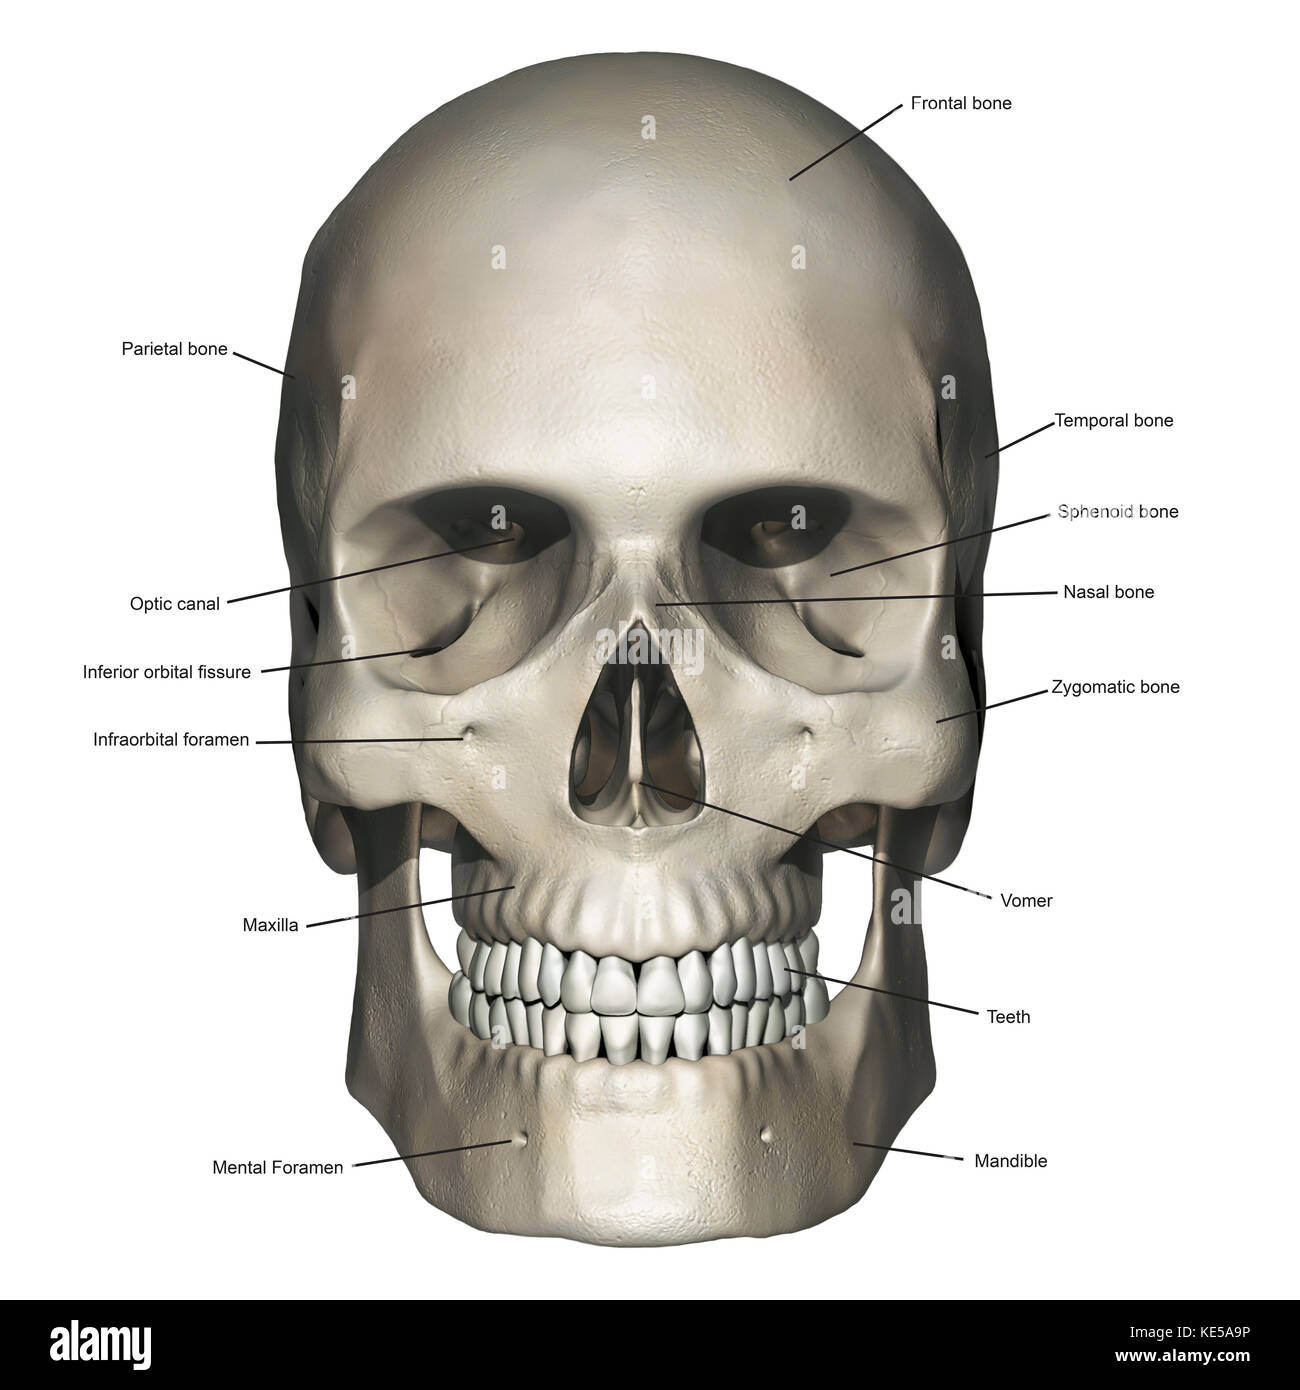 Anterior view of human skull anatomy with annotations. Stock Photo